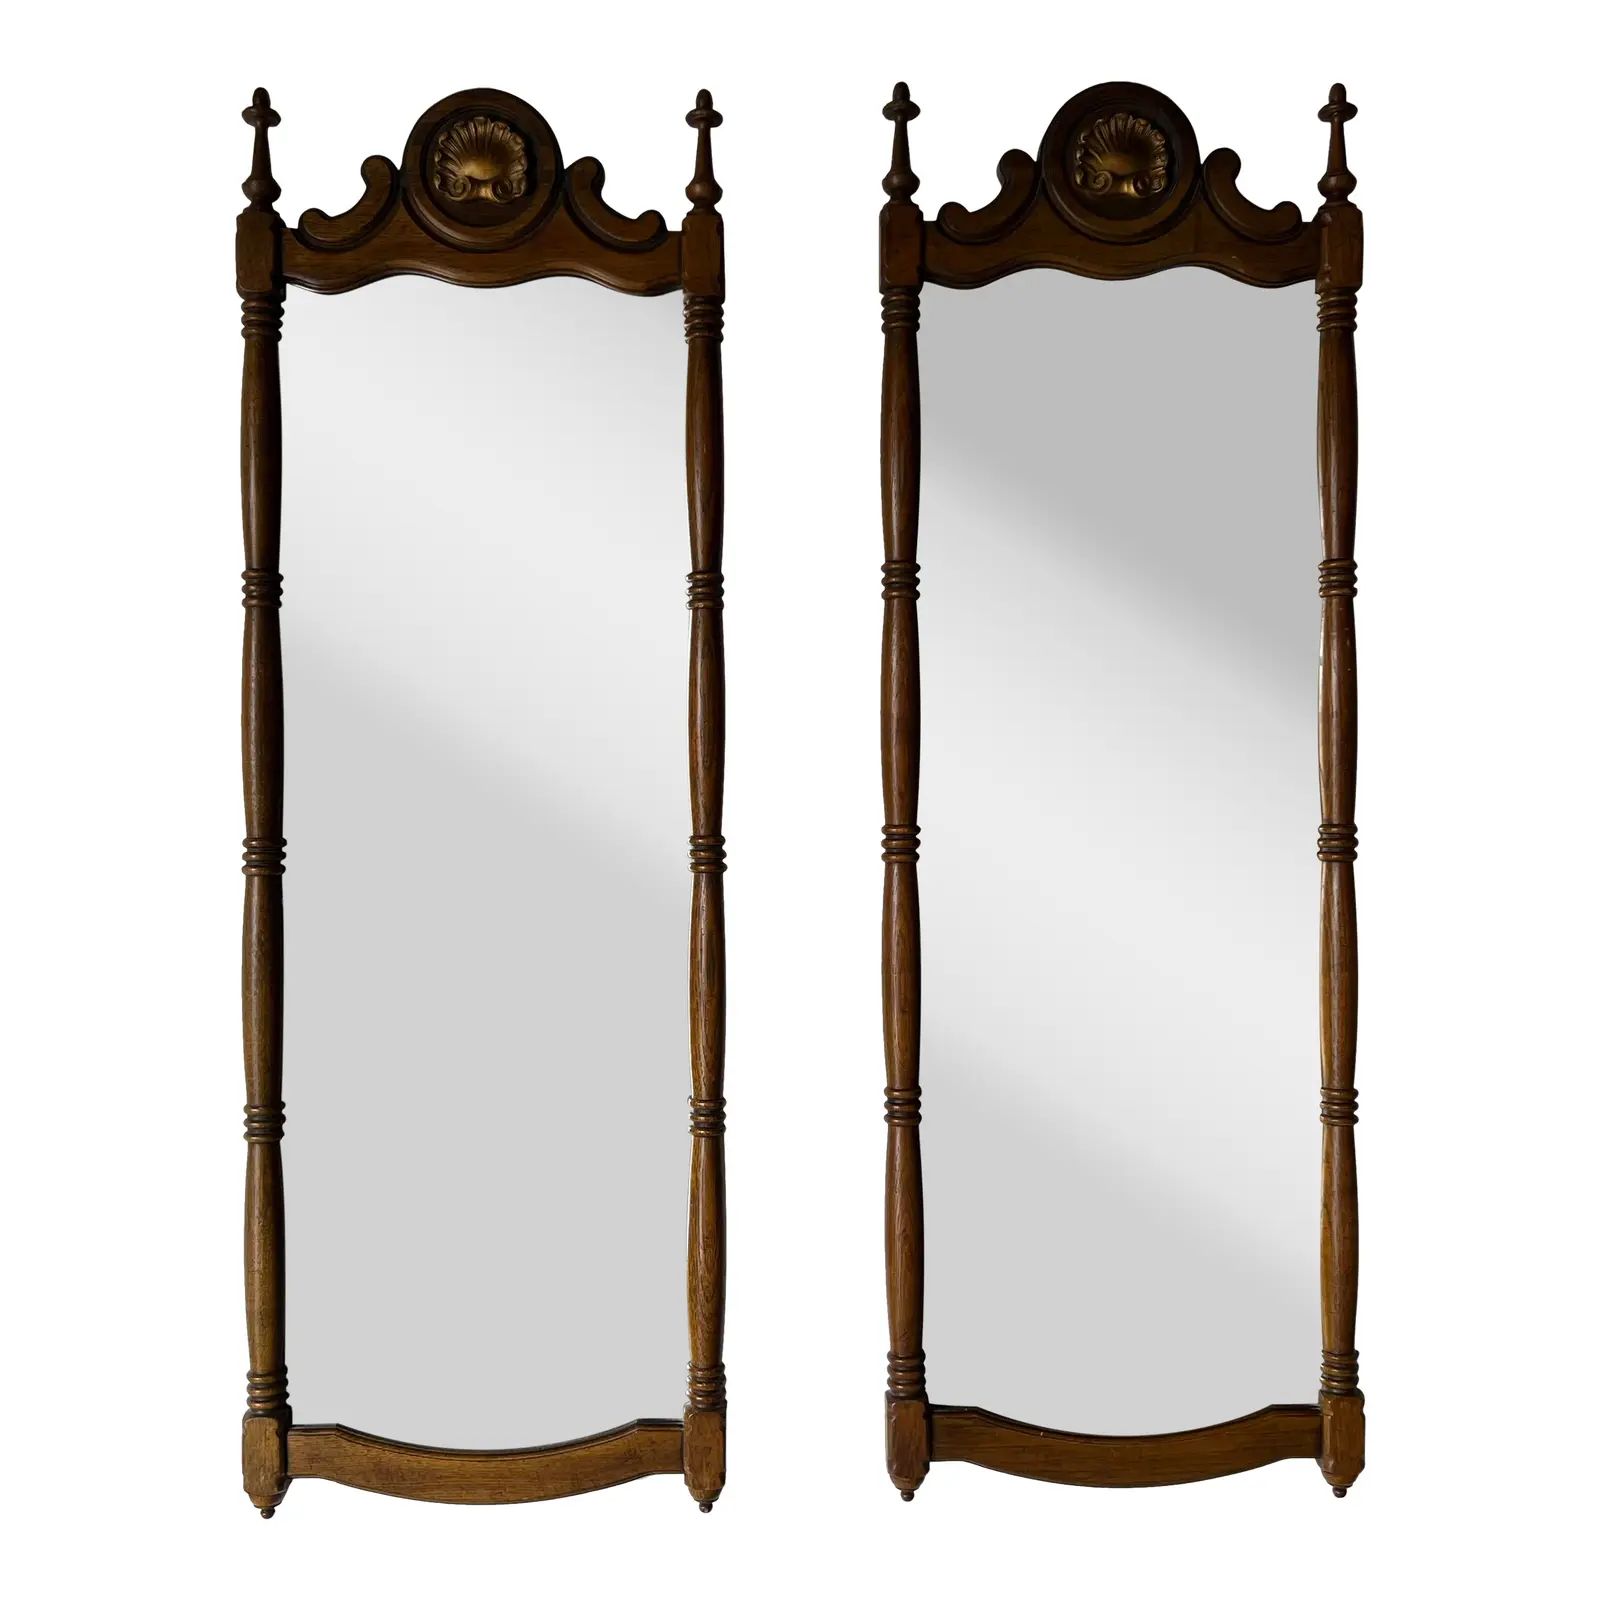 60's Hollywood Regency Thomasville Carved Wood Frame Wall Mirrors - a Pair | Chairish